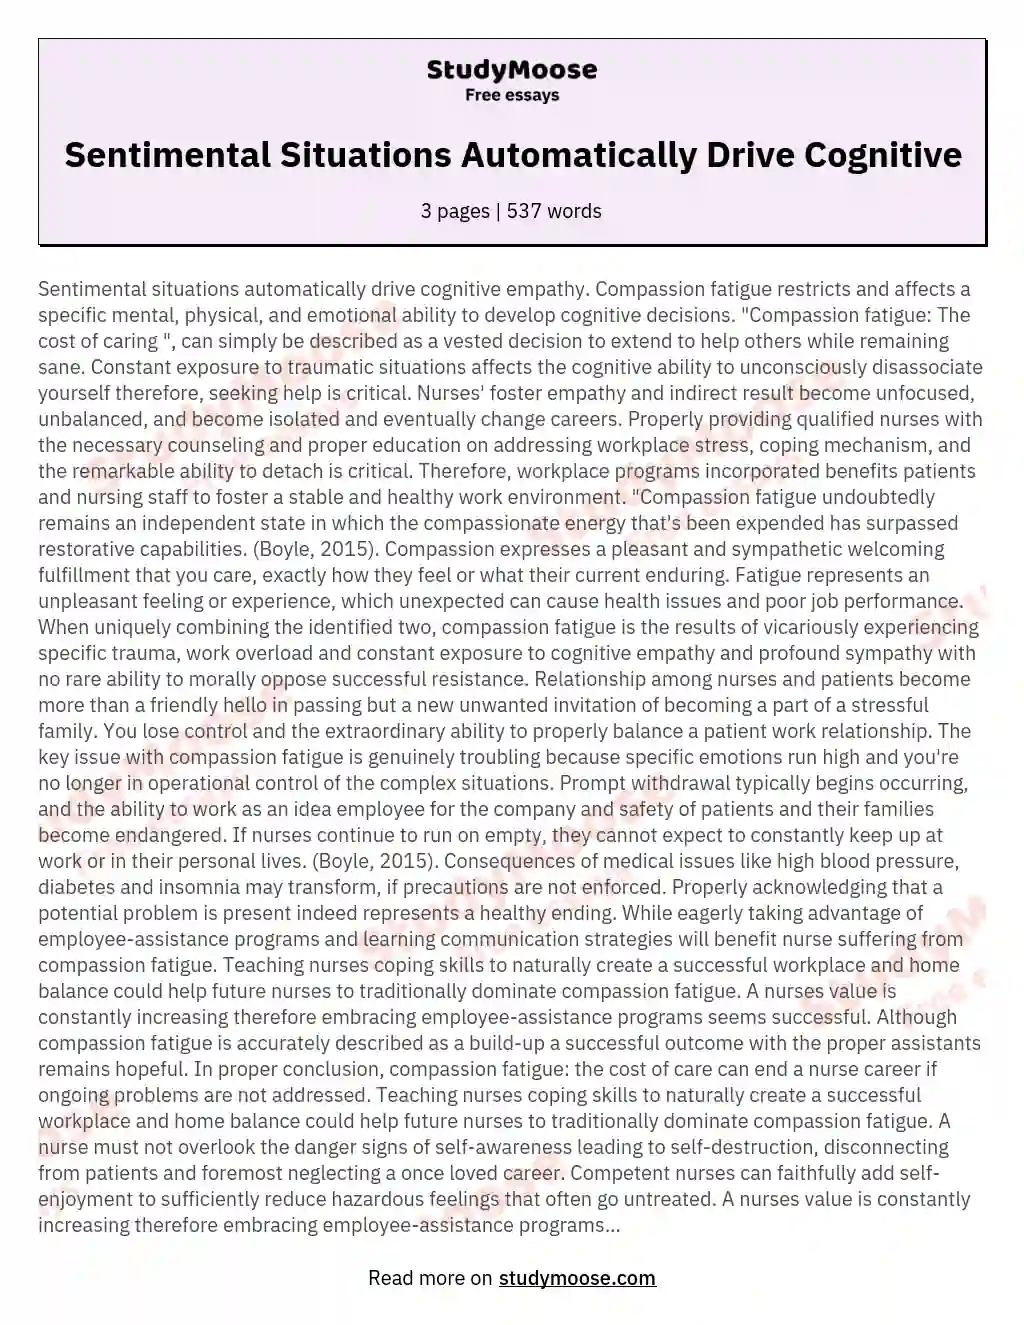 Sentimental Situations Automatically Drive Cognitive essay